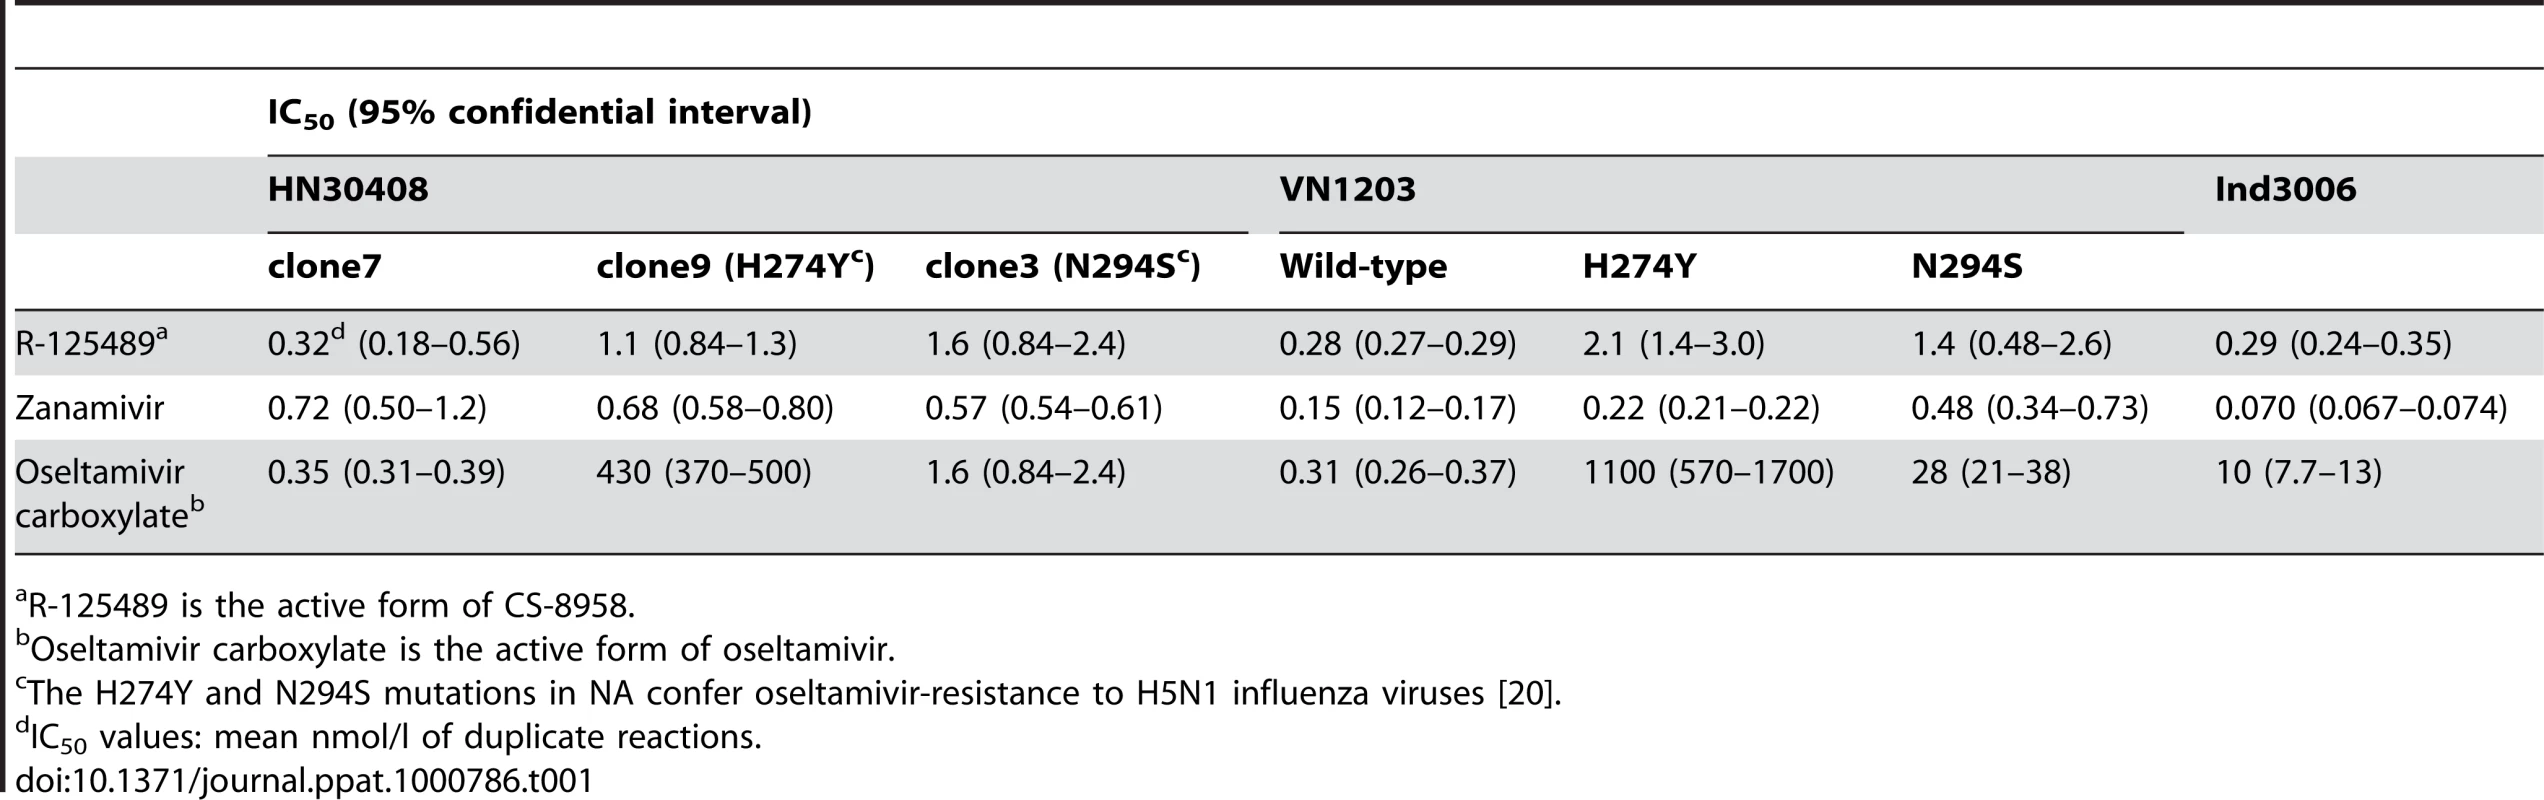 Inhibitory effect of R-125489, zanamivir, and oseltamivir carboxylate on the NA activity of H5N1 influenza viruses.